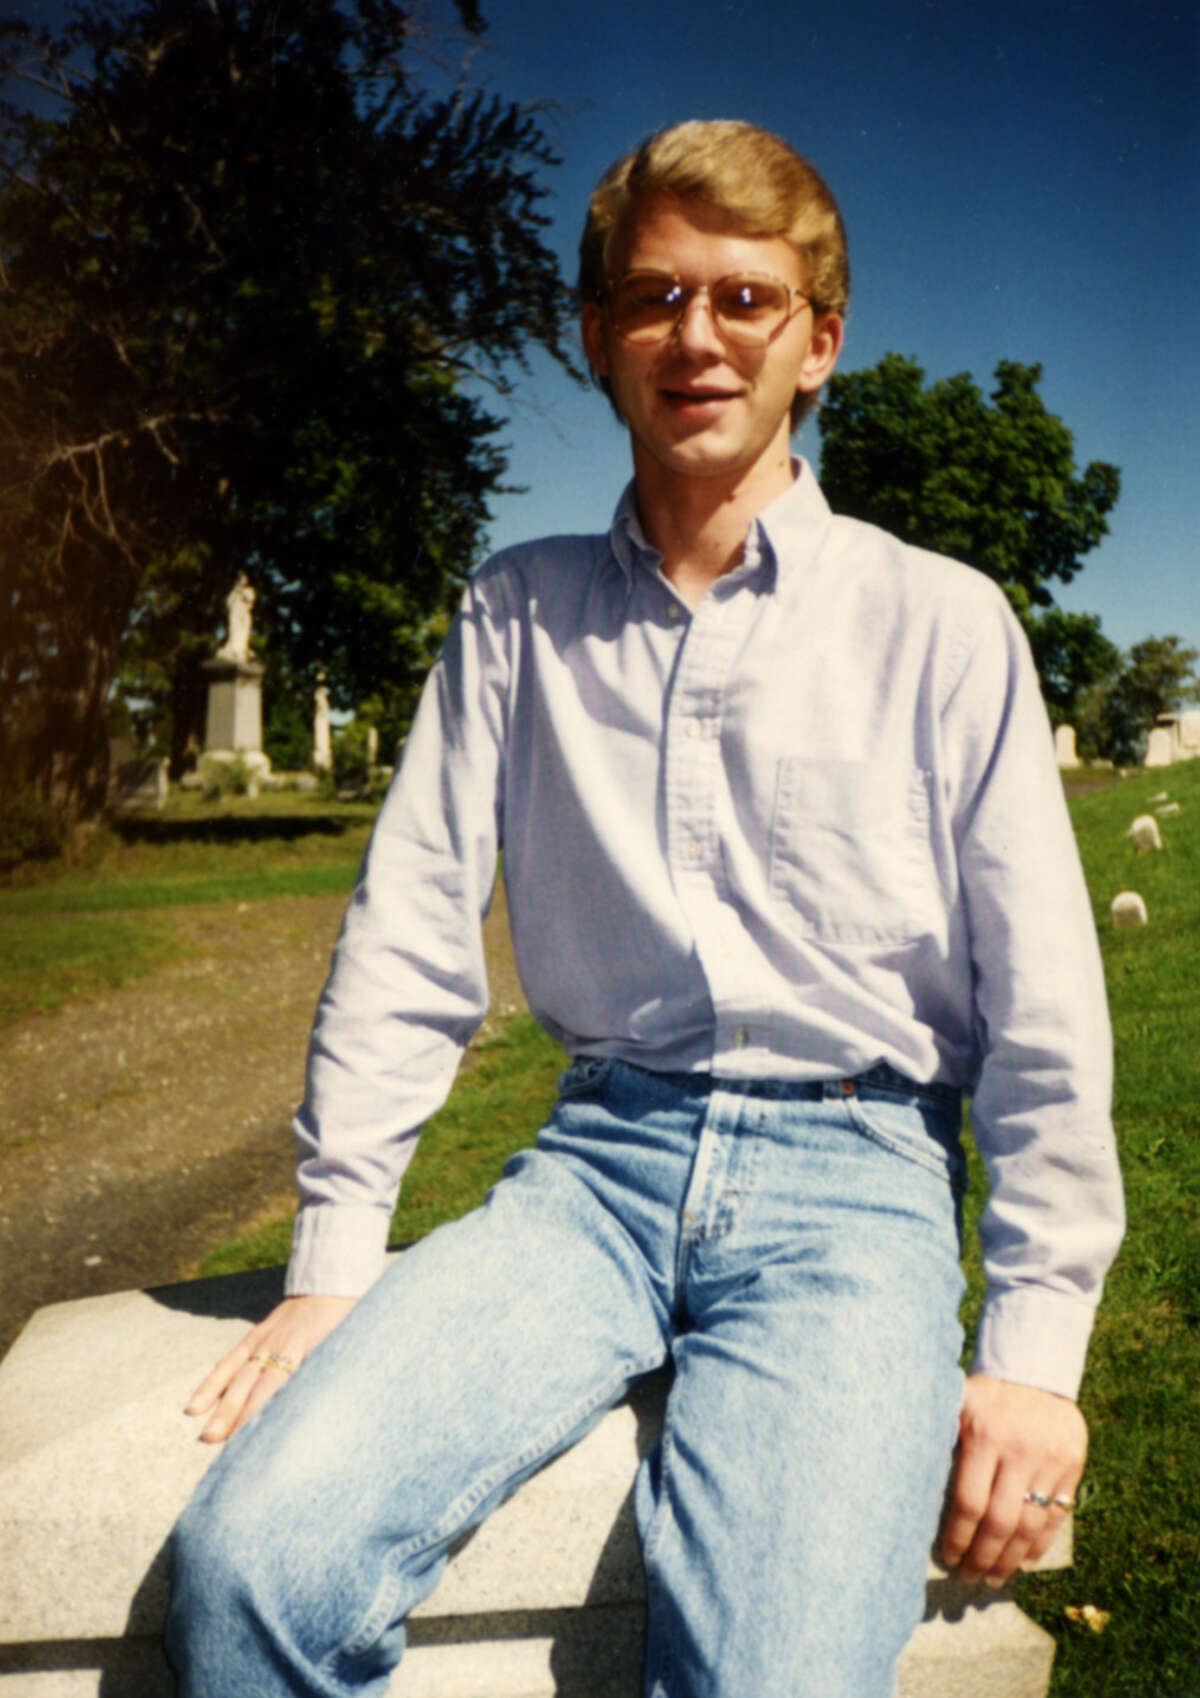 John Watkins of Glens Falls had an affair with priest Gary Mercure in the 1990s. Watkins, pictured here in a photo that Mercure took during their affair, said he told church officials Mercure was attracted to his youthful looks and showed a sexual interest in young boys. (Photo courtesy John Watkins)